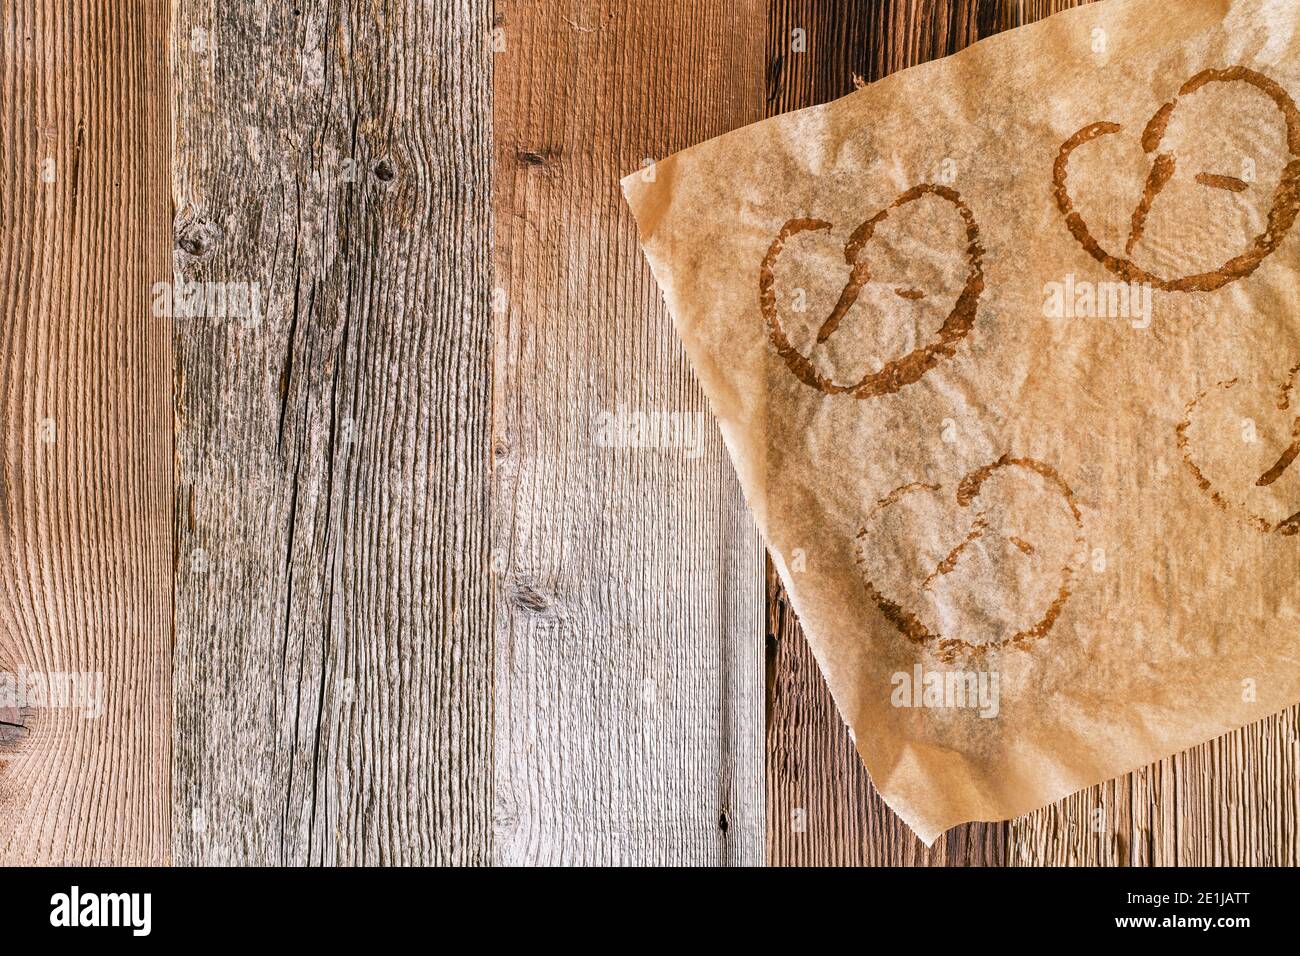 Used baking paper with imprints of baked pretzels on a rustic wooden background. Pretzels are typical German food in Bavaria and at the Oktoberfest. Stock Photo